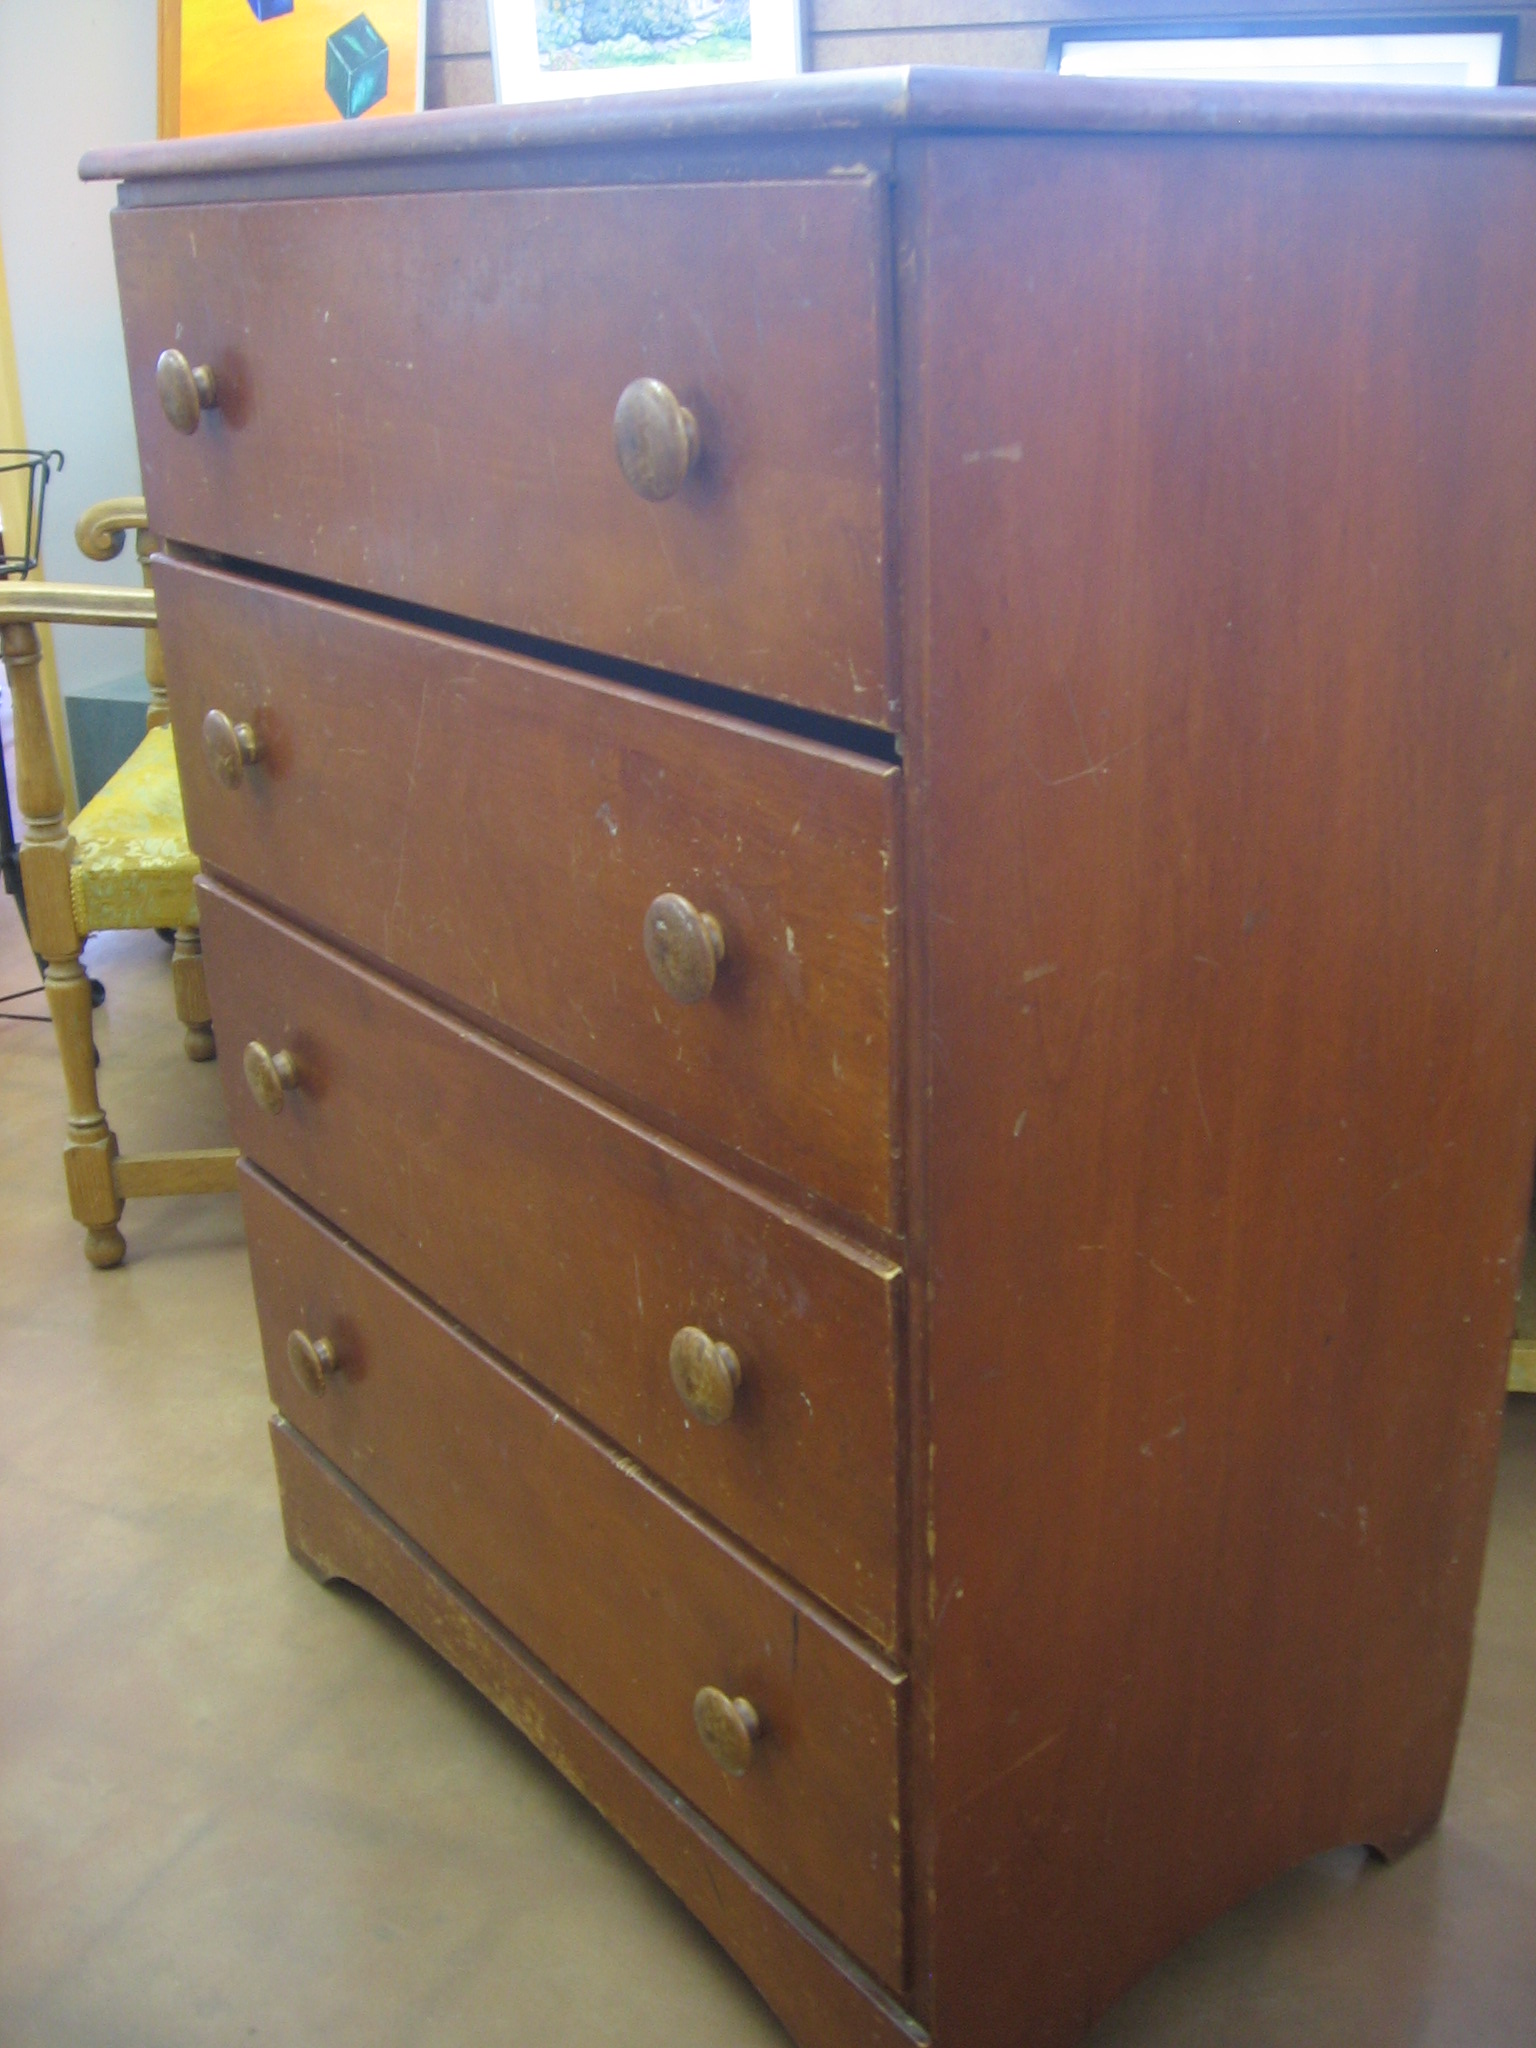 a wooden dresser with five drawers on the bottom